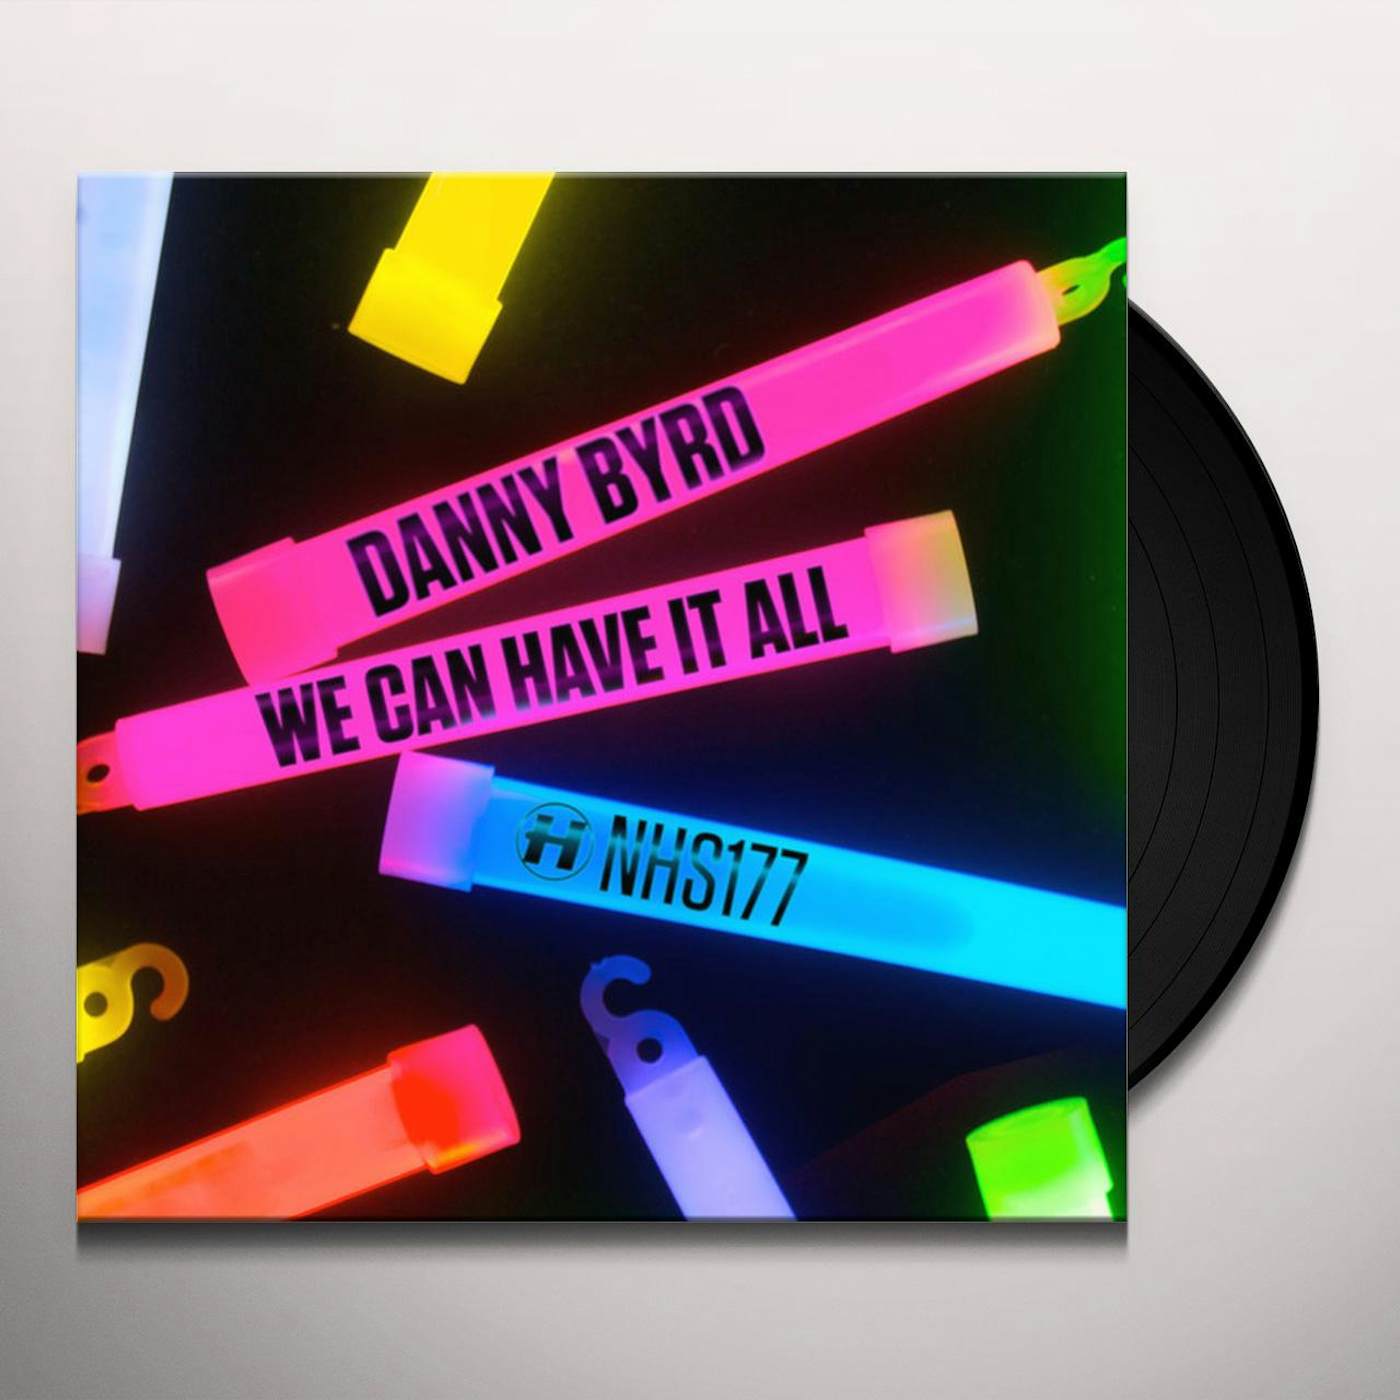 Danny Byrd We Can Have It All Vinyl Record